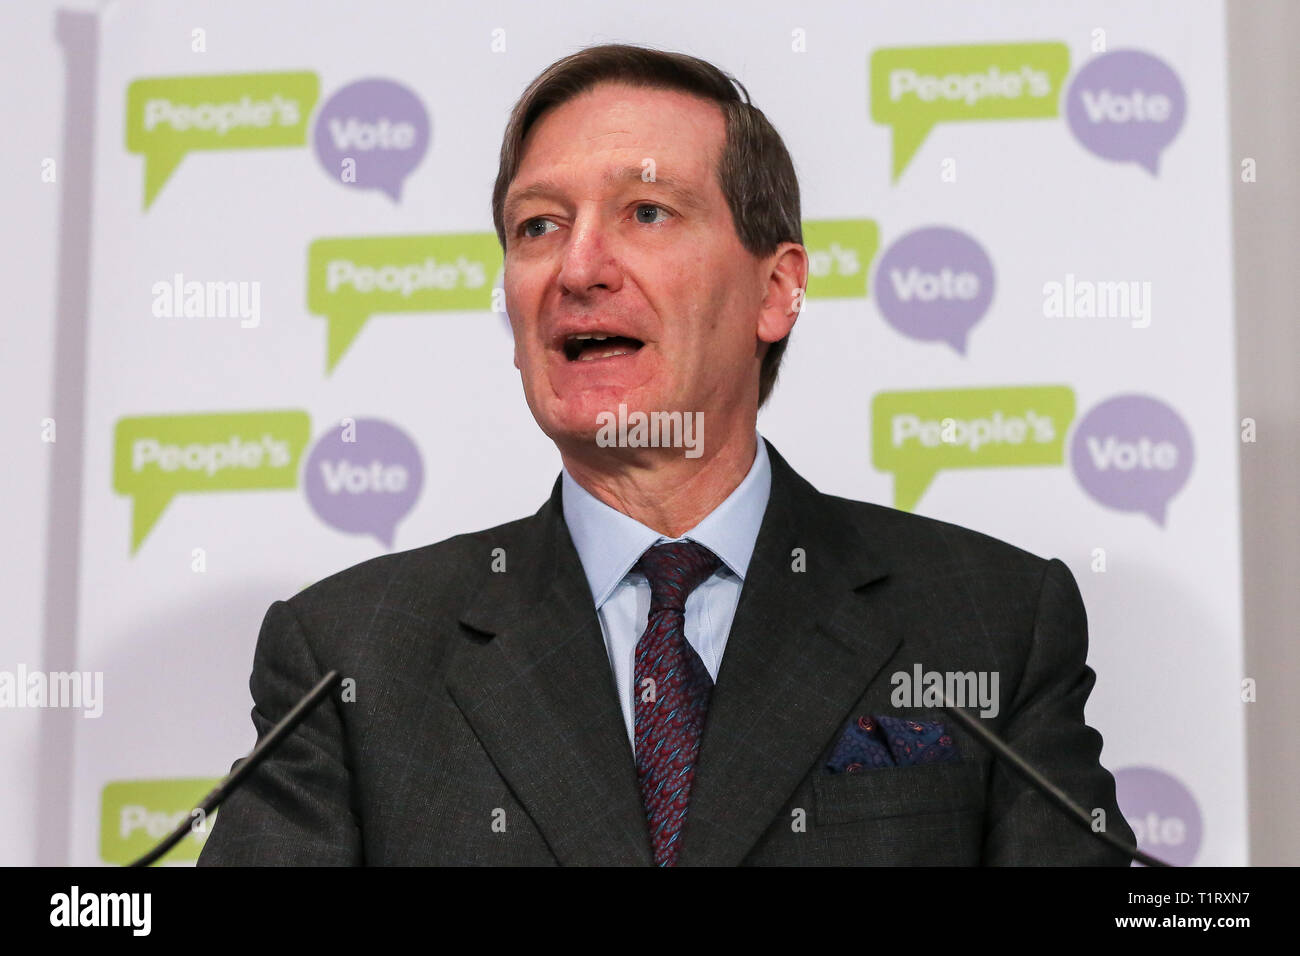 Dominic Grieve MP - Conservative former Attorney General is seen speaking at a People's Vote press conference in Westminster setting out an analysis of the different Brexit options facing Members of Parliament in indicative votes. British Prime Minister Theresa May told the backbench Tory MPs this evening that she will stand down if they back her EU withdrawal deal. Stock Photo